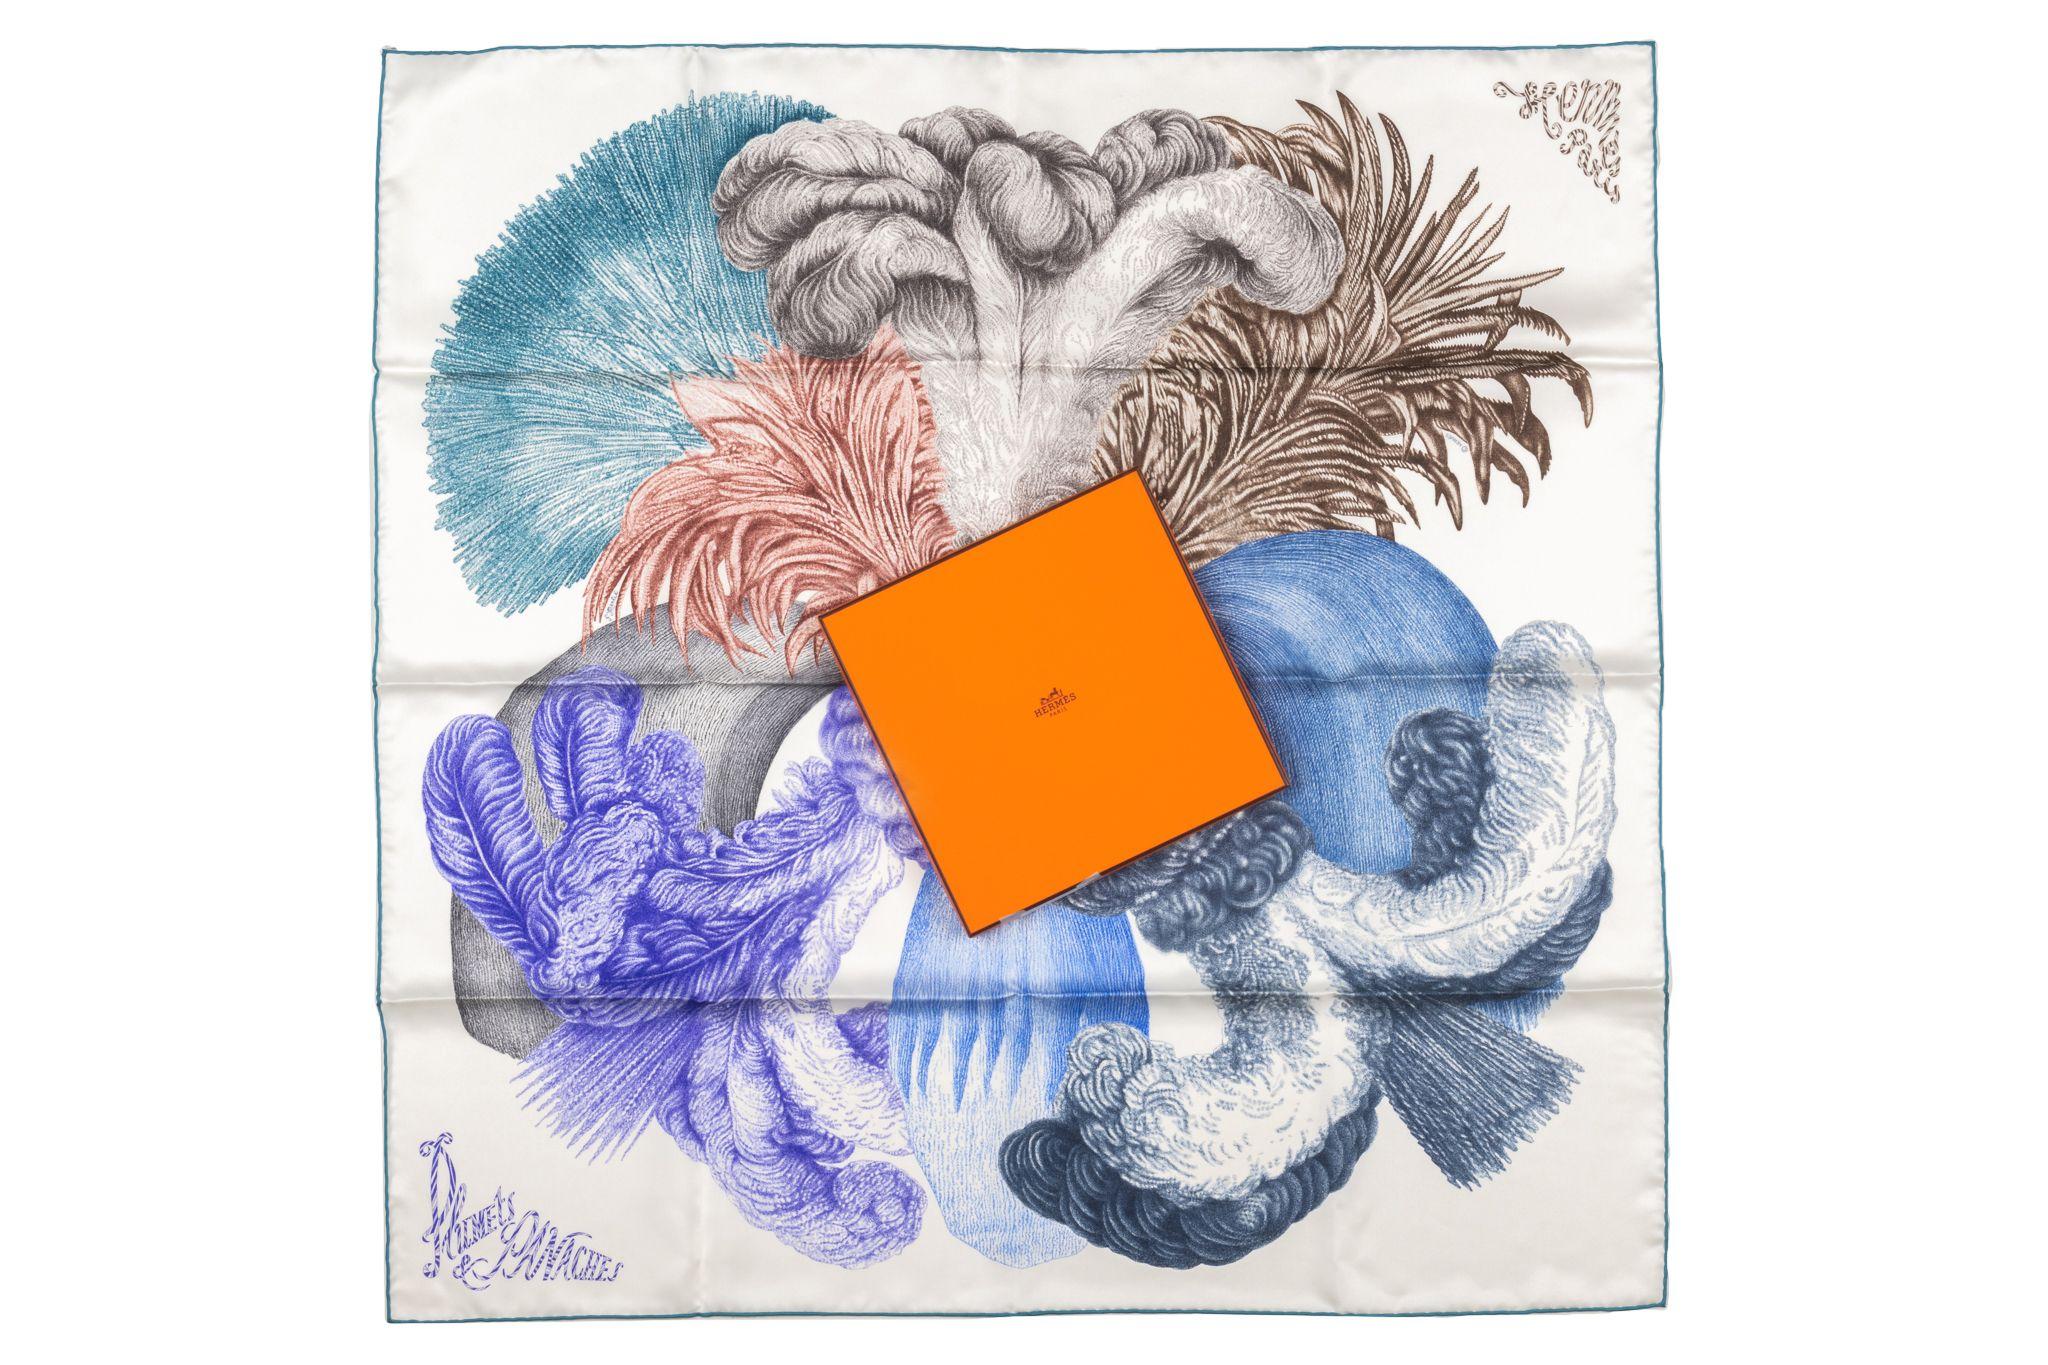 Hermès new Plumets et Panaches Silk scarf in several blue tones on white. Comes with the original box.